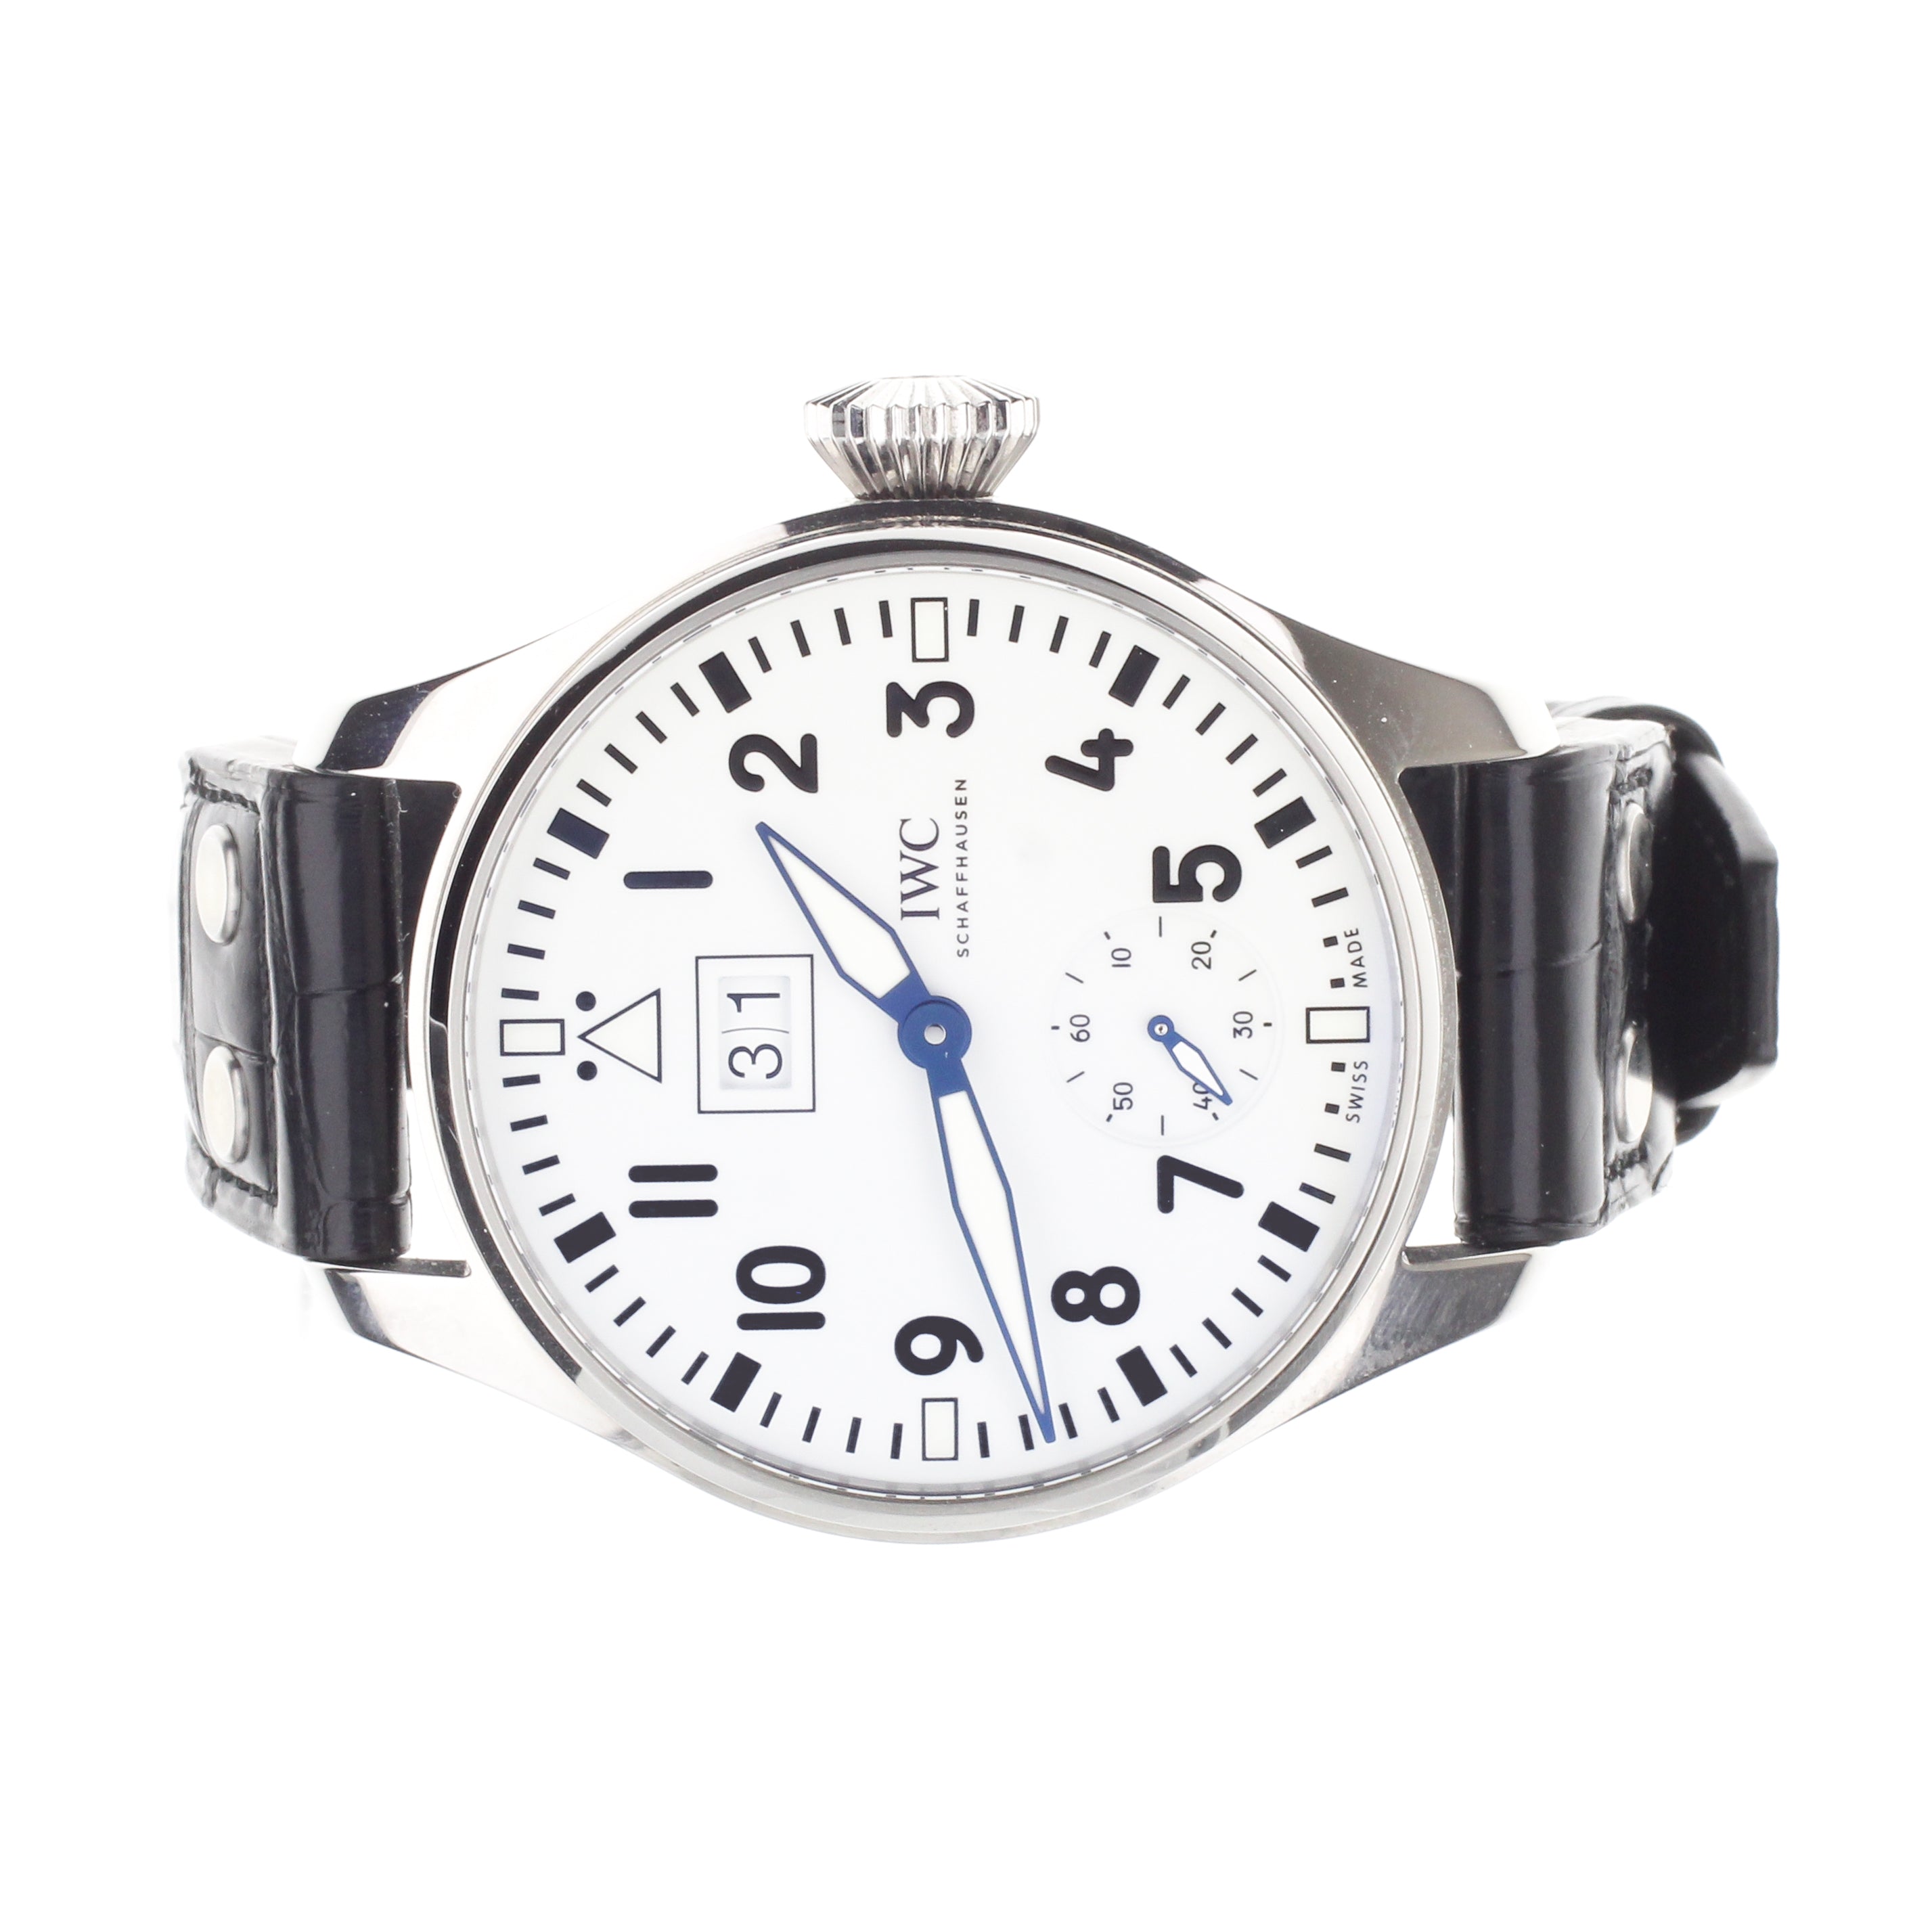 IWC Big Pilot's Watch Big Date Jubilee White Lacquer Dial 46mm IW510504 Full Set